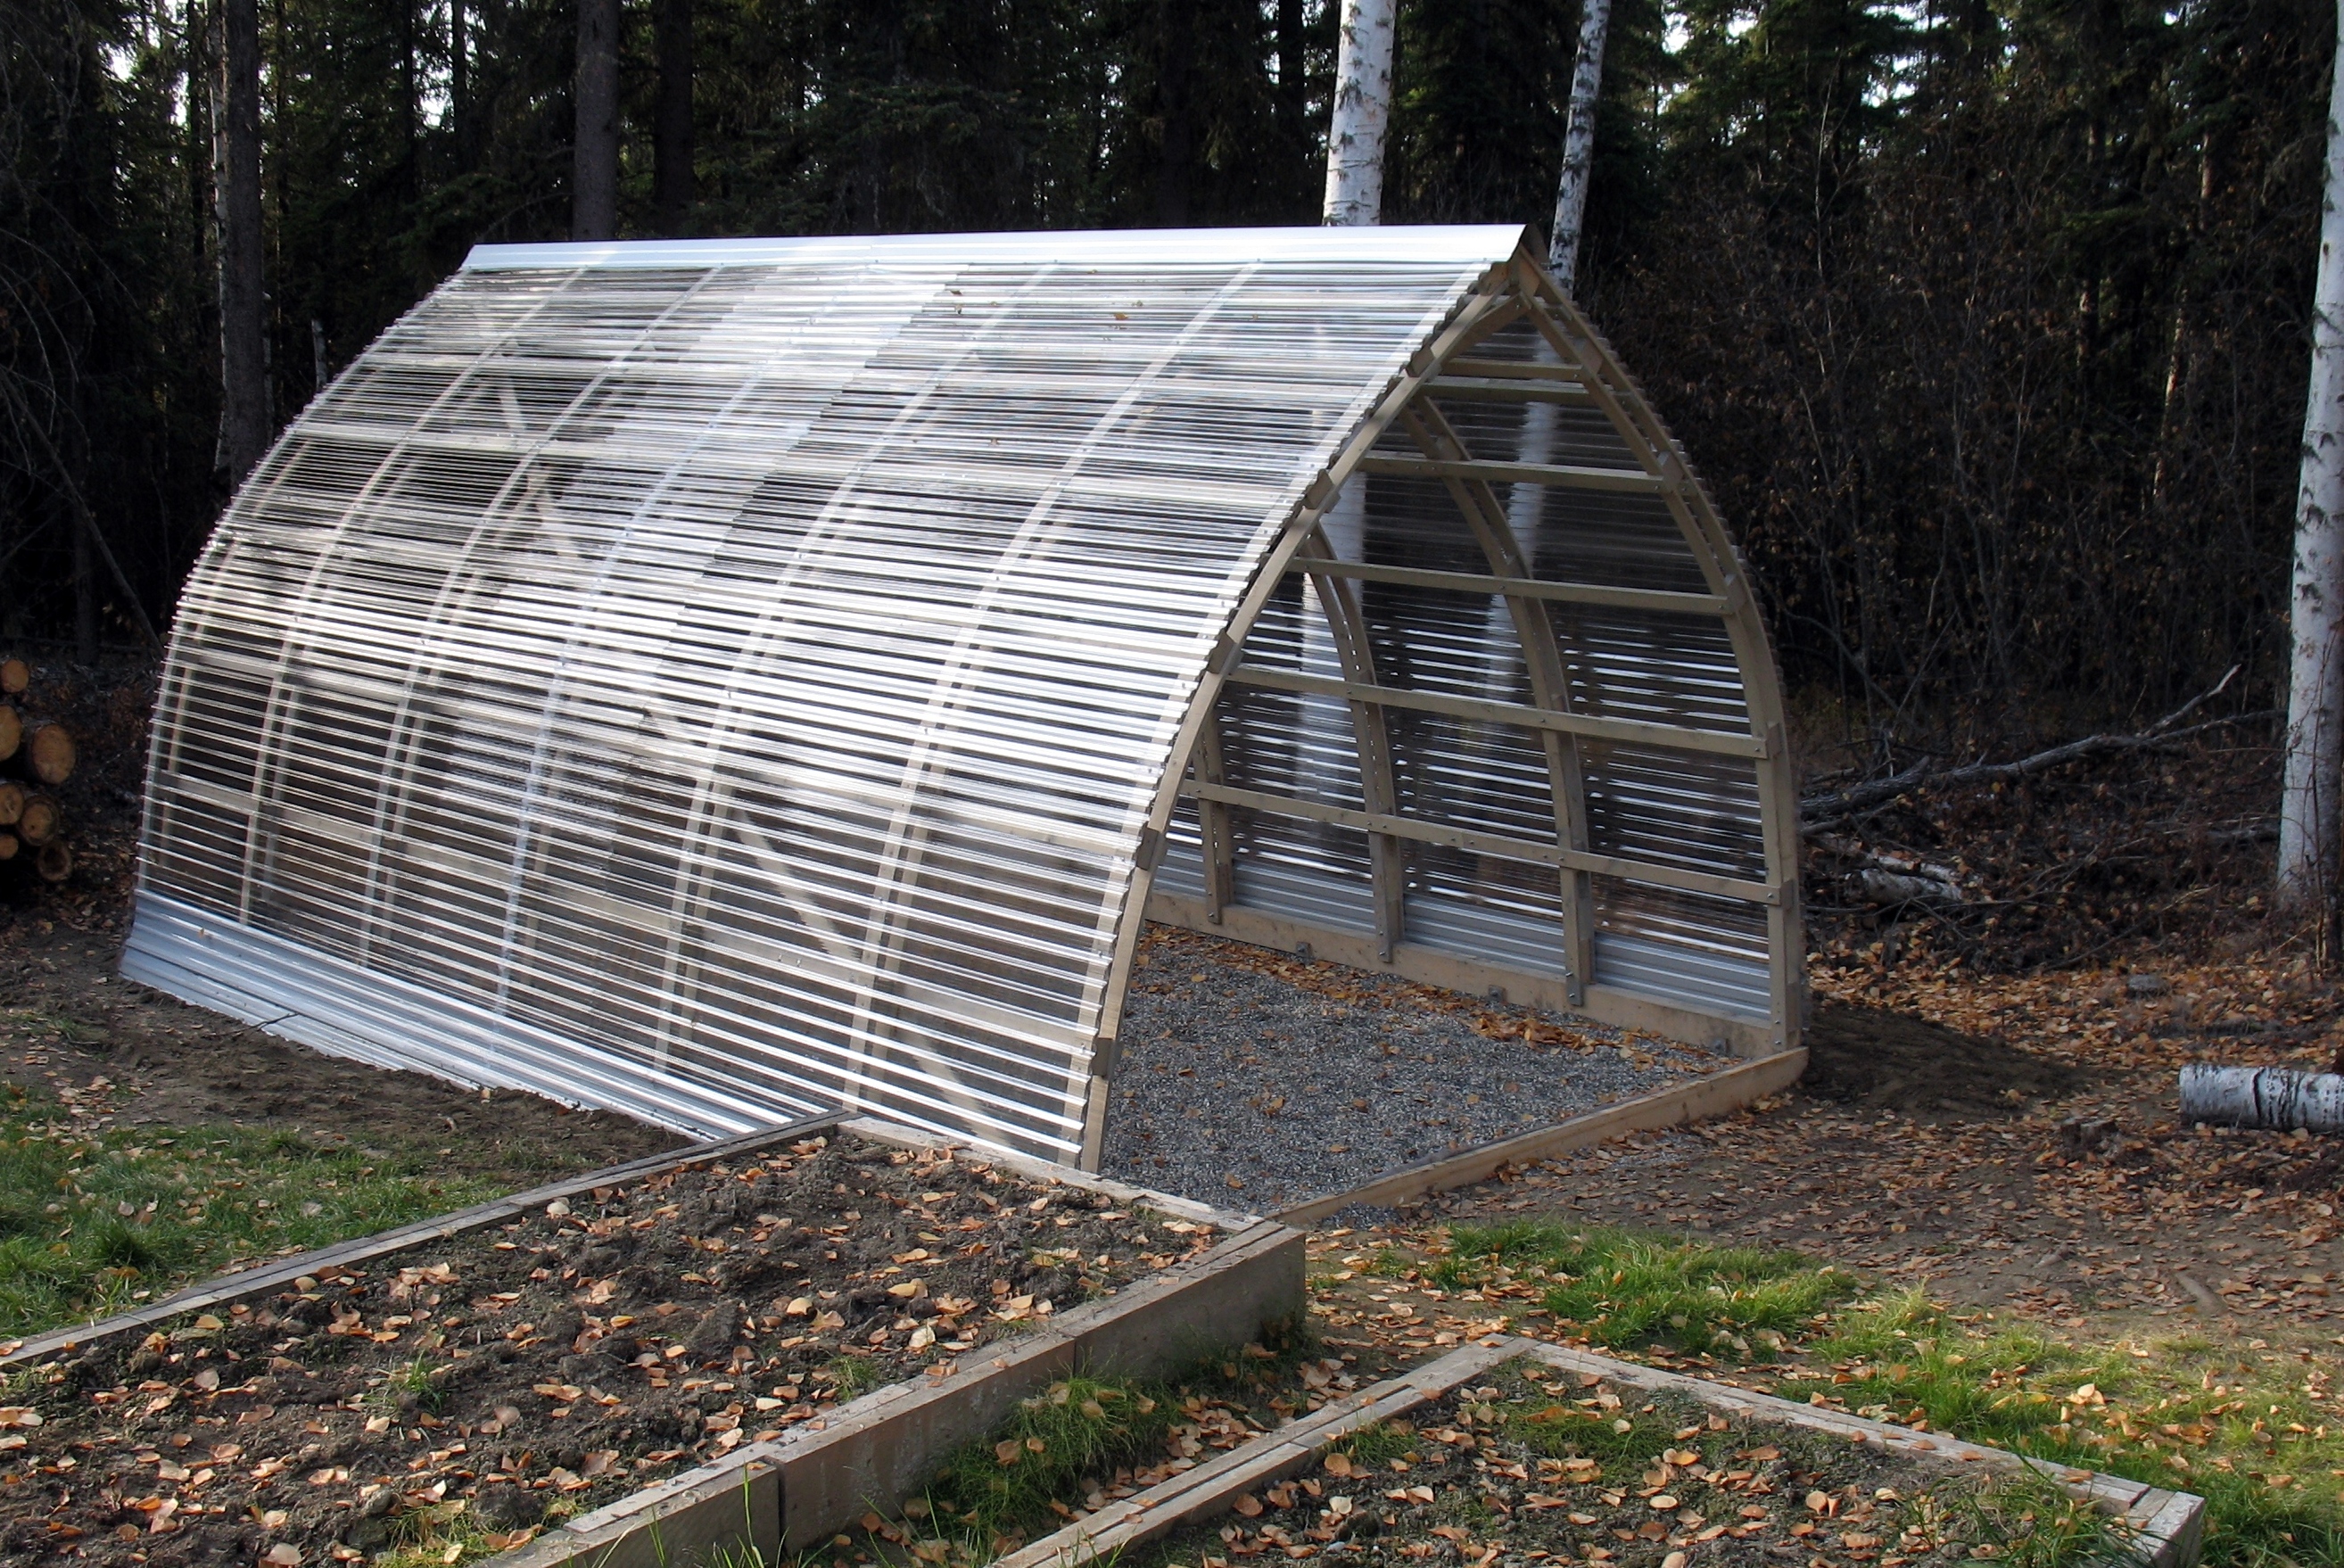 Hoop/quonset hut type building for temporary living ...